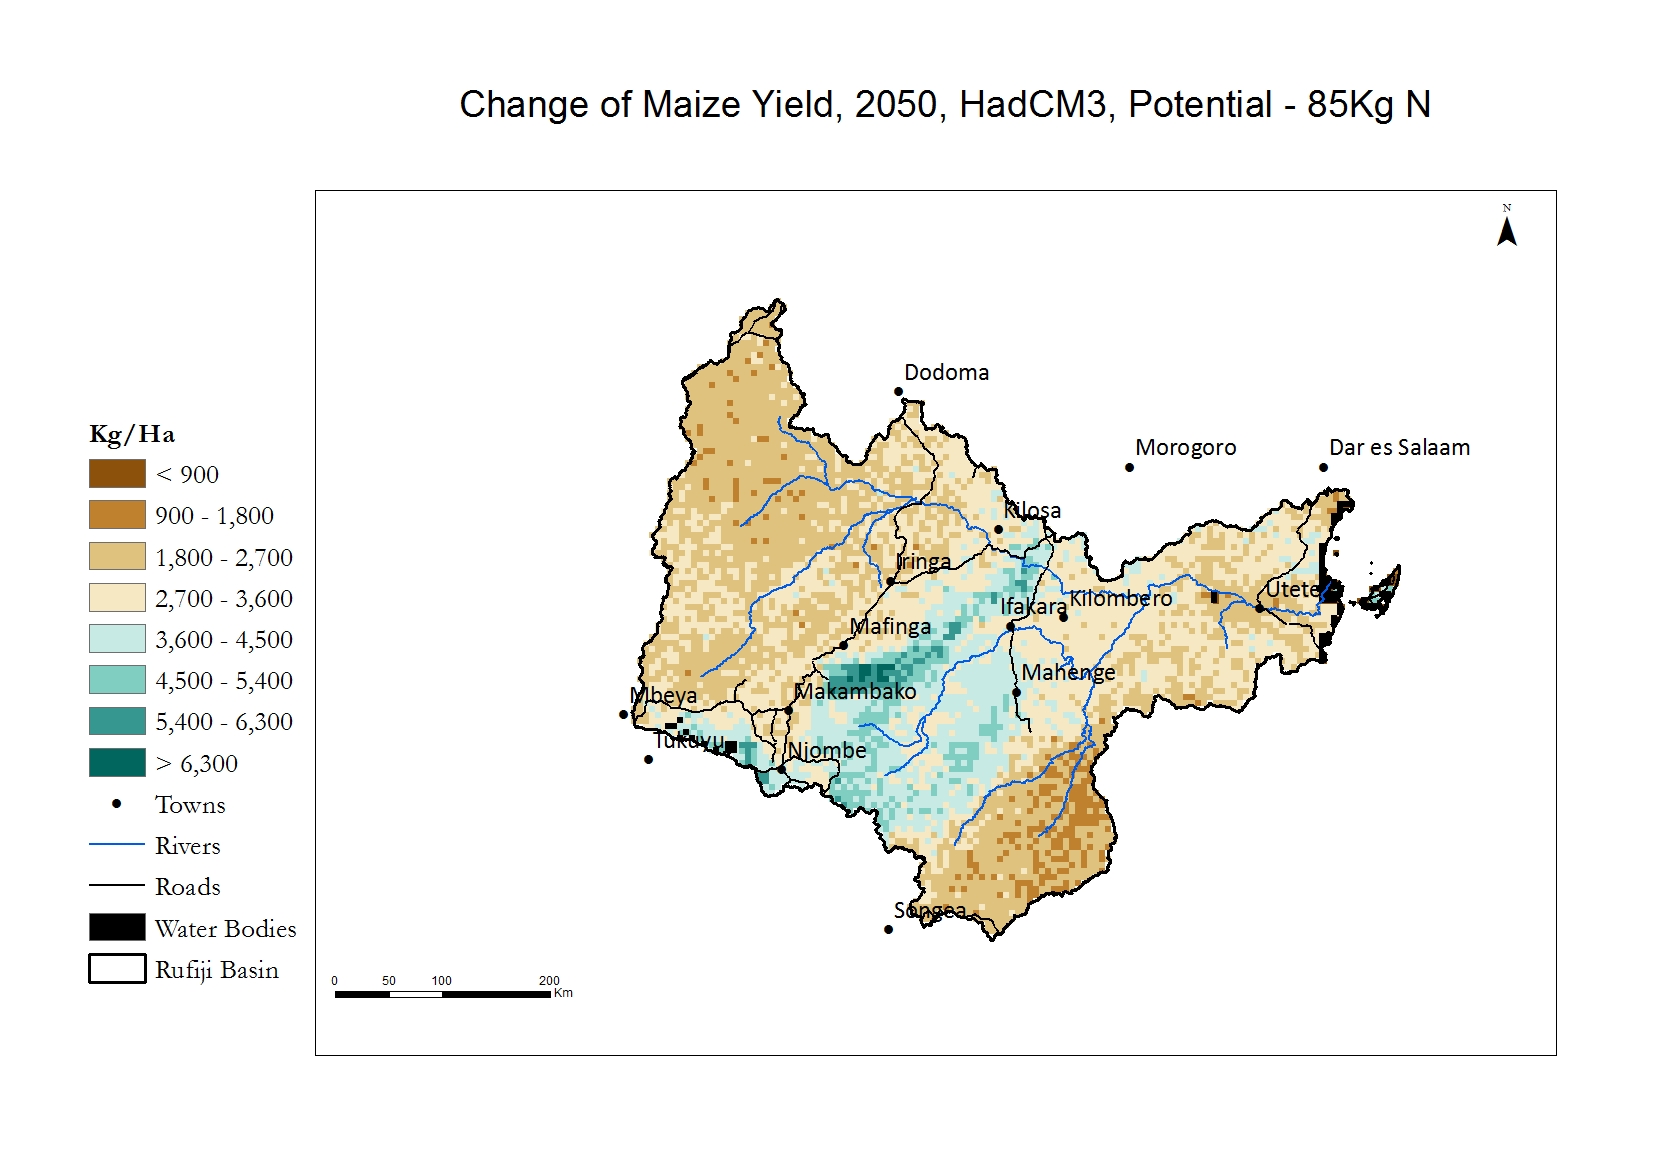 Future difference in yield (future rainfed - future potential/irrigated)